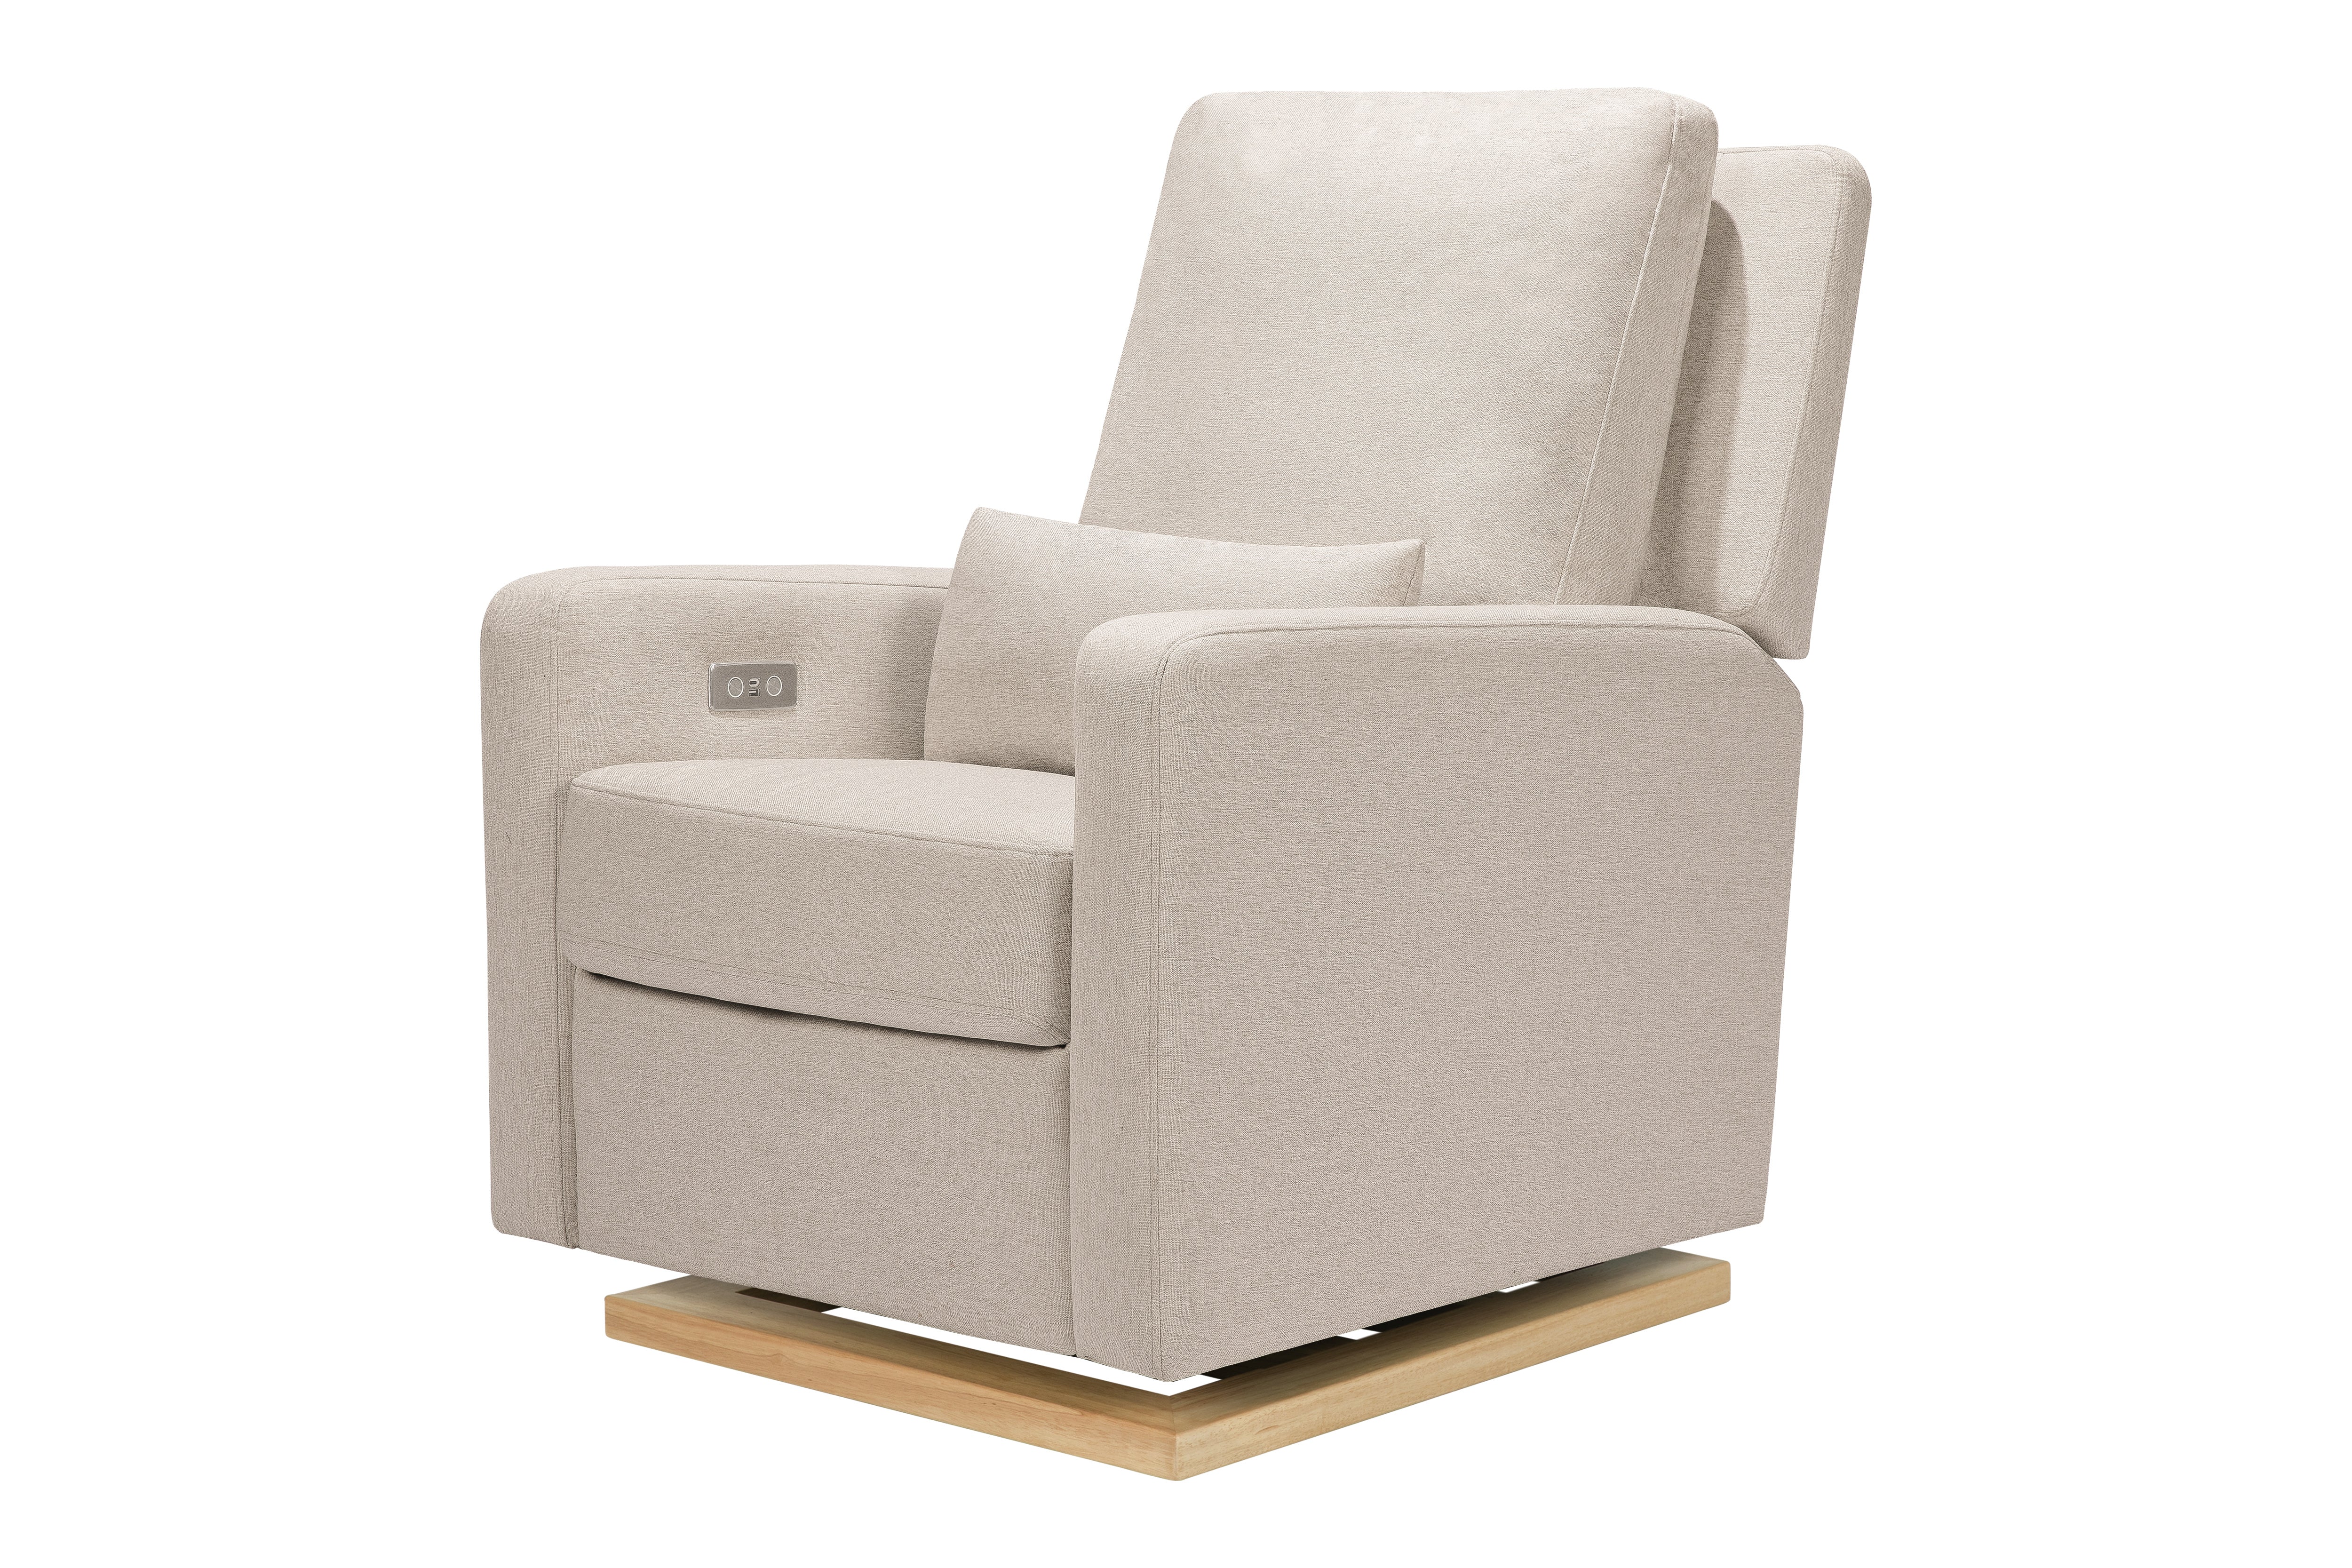 Sigi Electronic Recliner and Glider in Performance Beach Eco-Weave with Light Wood Base - Twinkle Twinkle Little One